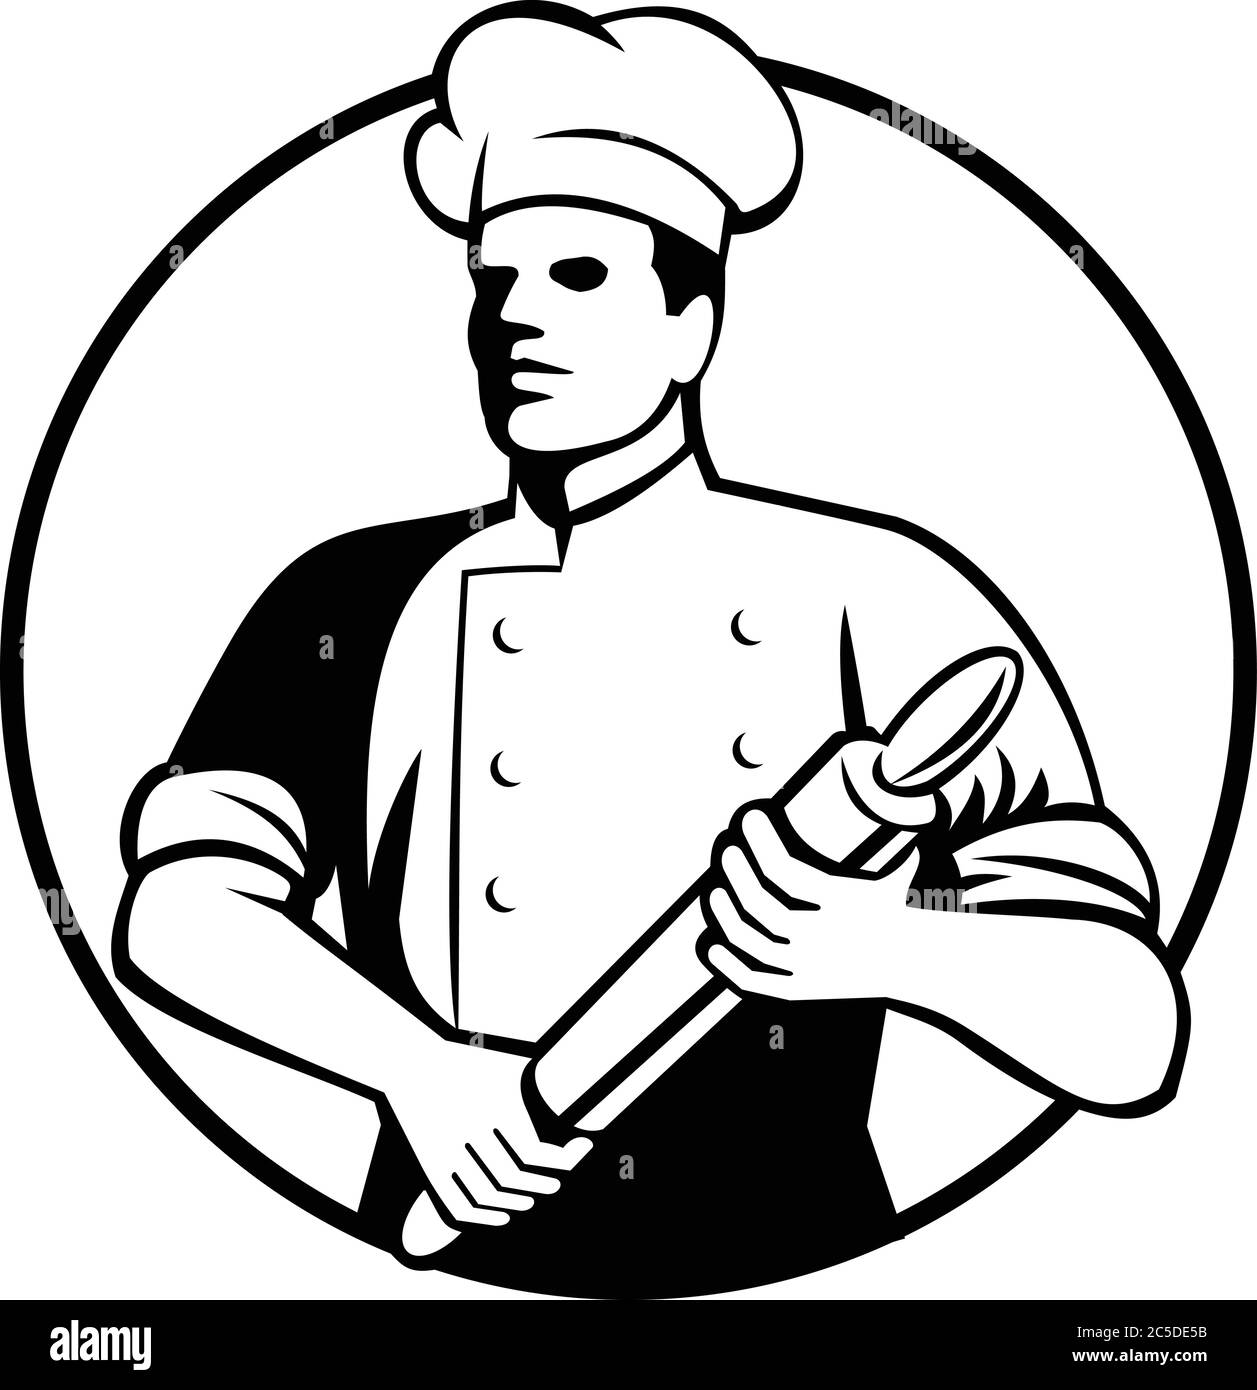 Retro black and white style illustration of a baker, chef, cook or food worker holding a rolling pin viewed from front set inside circle on isolated b Stock Vector